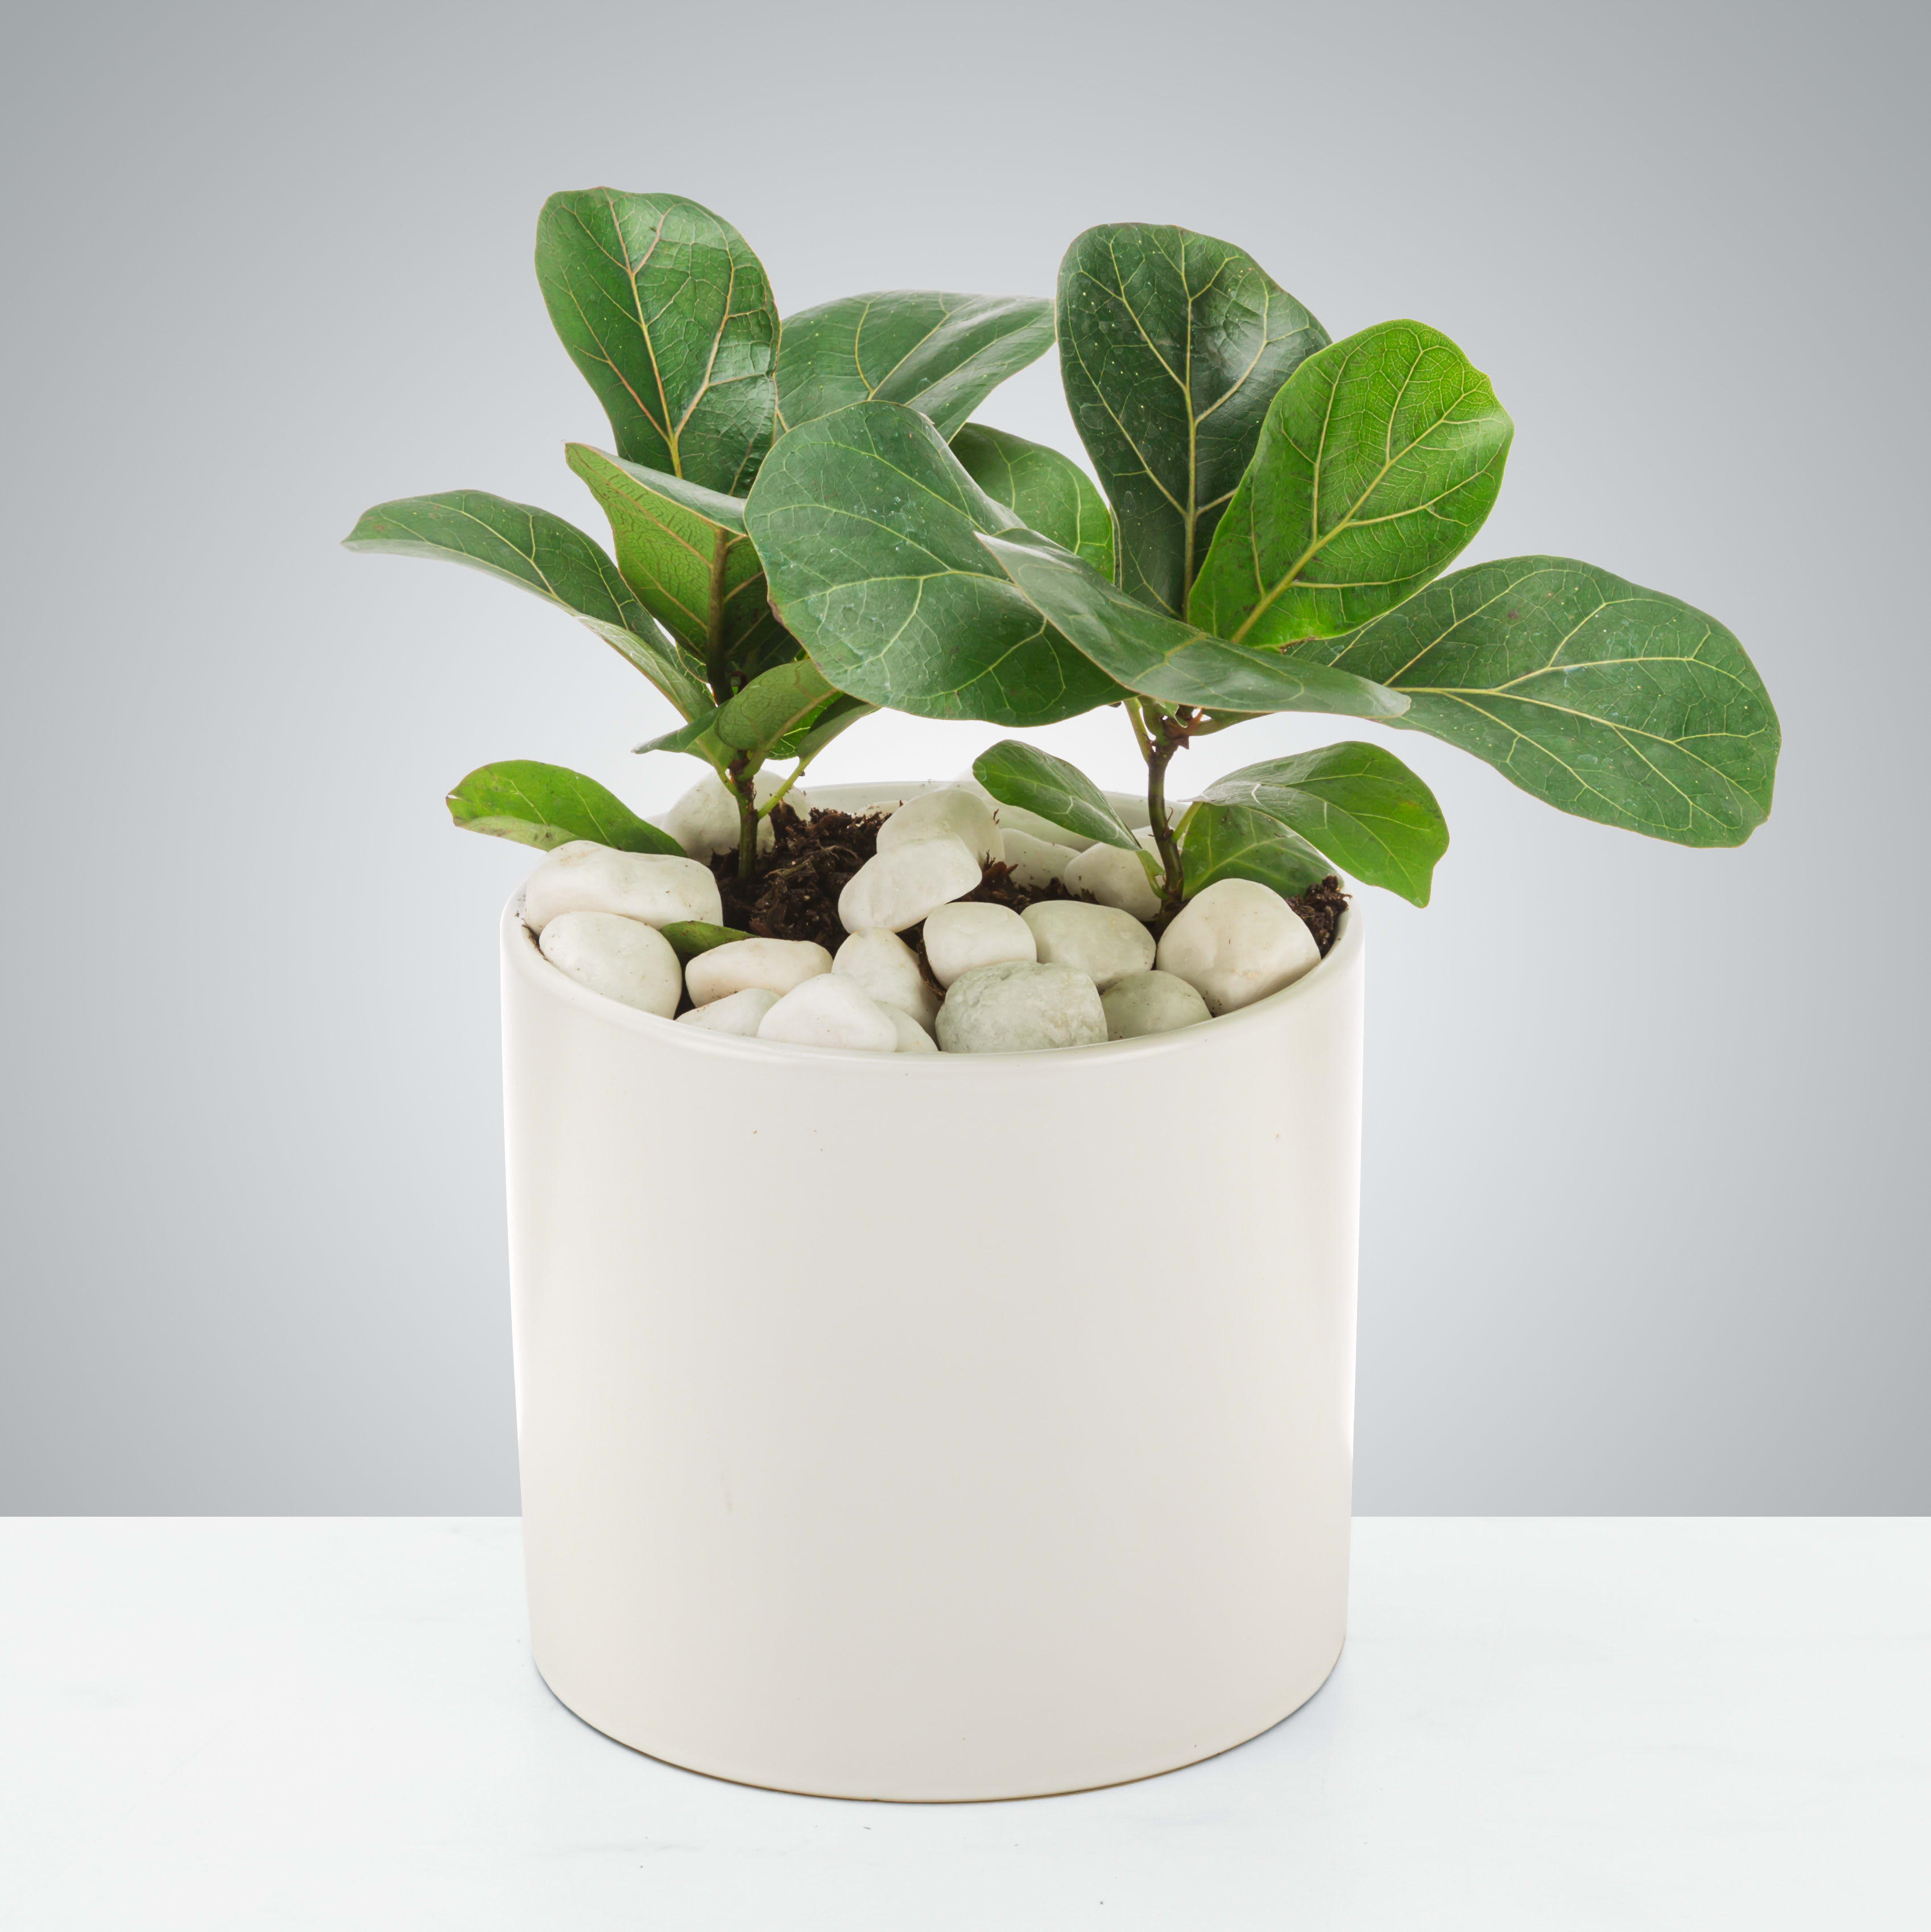 Baby Fig Tree by BloomNation™ - Baby fig trees need lots of light and a deep watering once a week if in a dry climate! These are a classic present and is sure to please! Send one to celebrate earth day or as a housewarming gift.